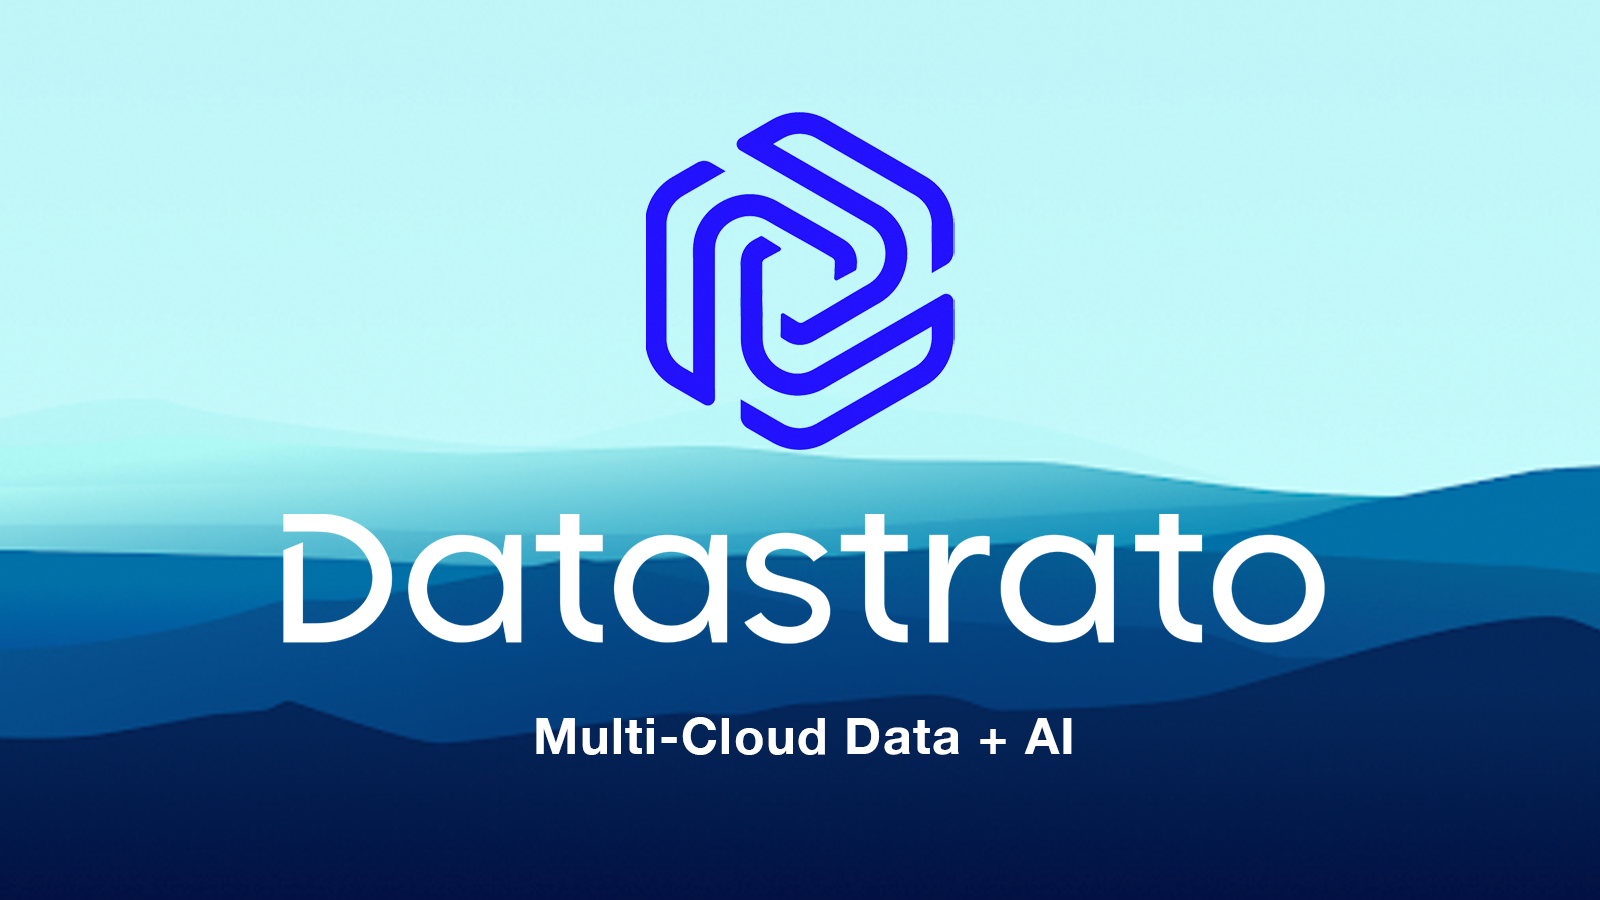 Banner for blog post with title "Datastrato Origin Story"